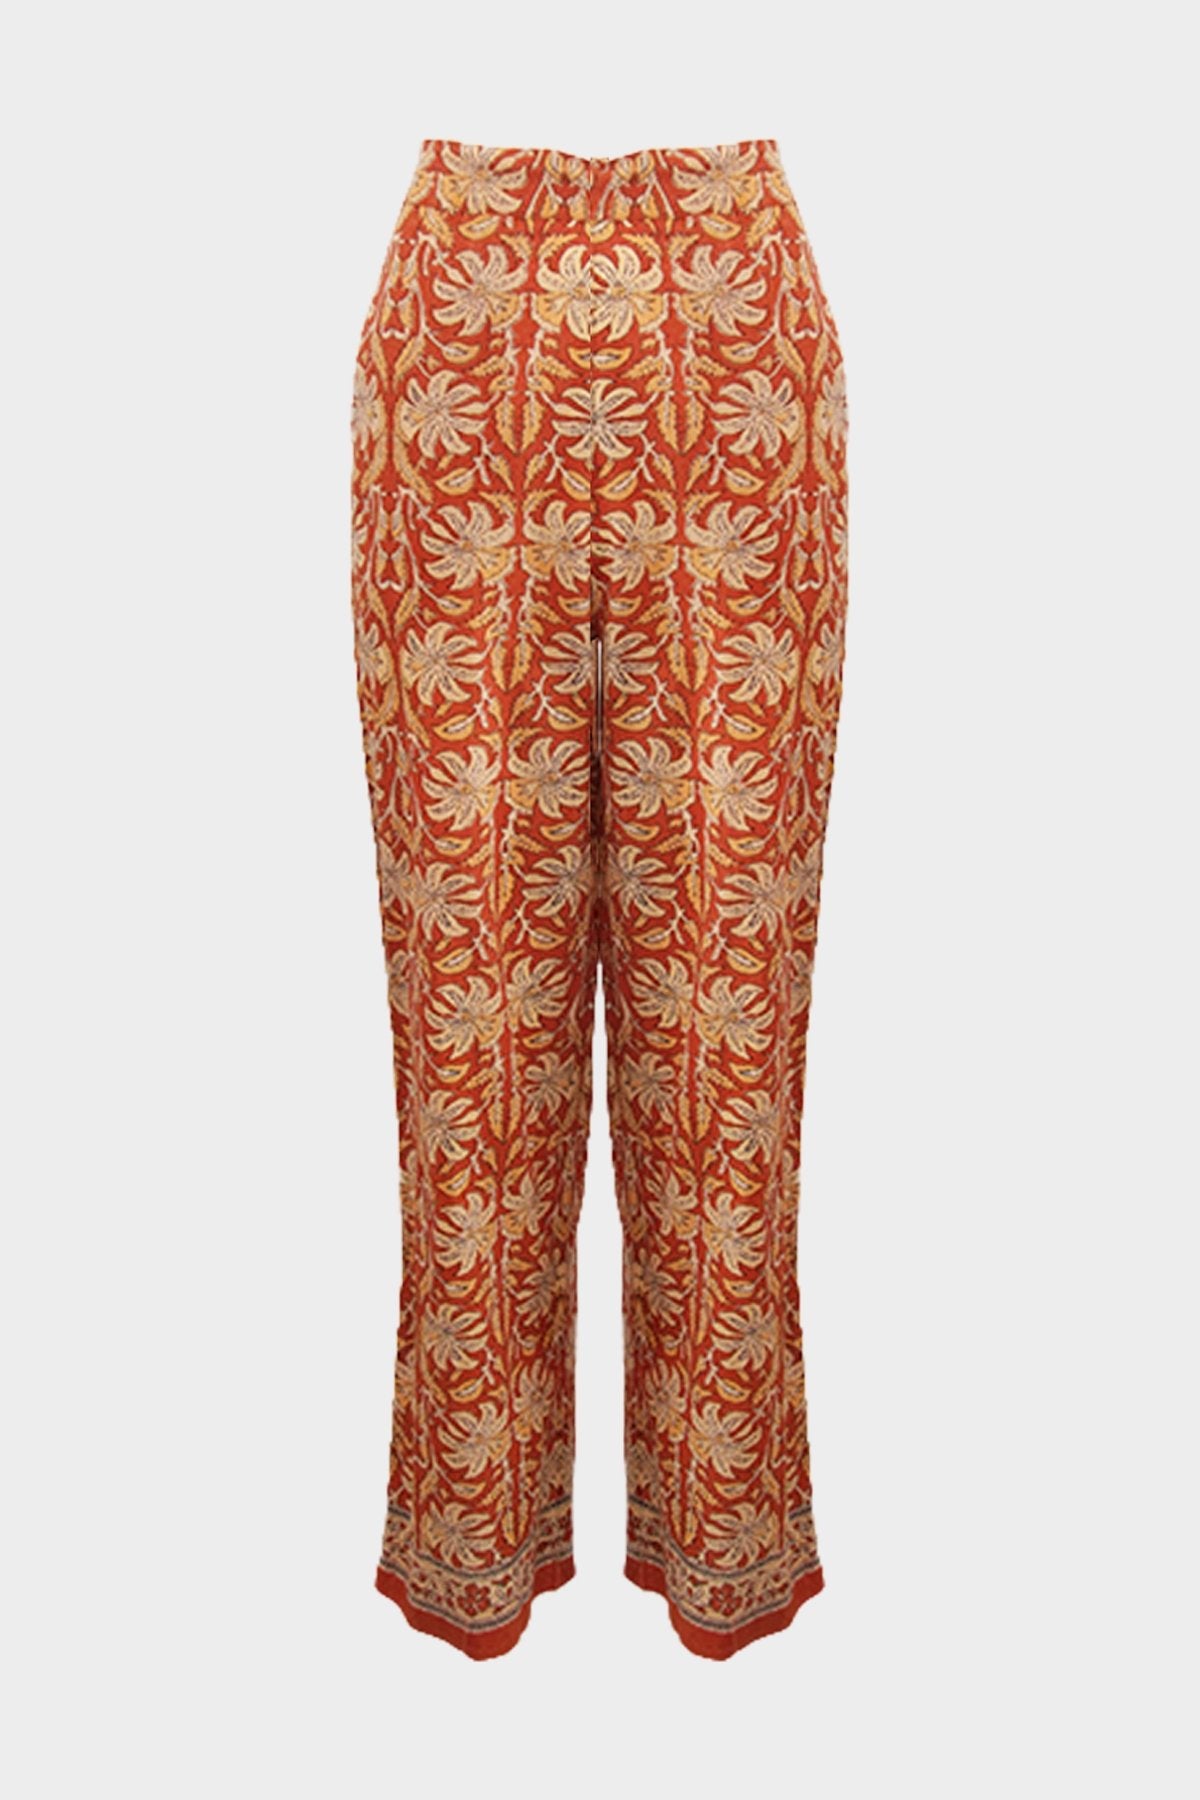 Jimmy Pant in Clementine - shop-olivia.com